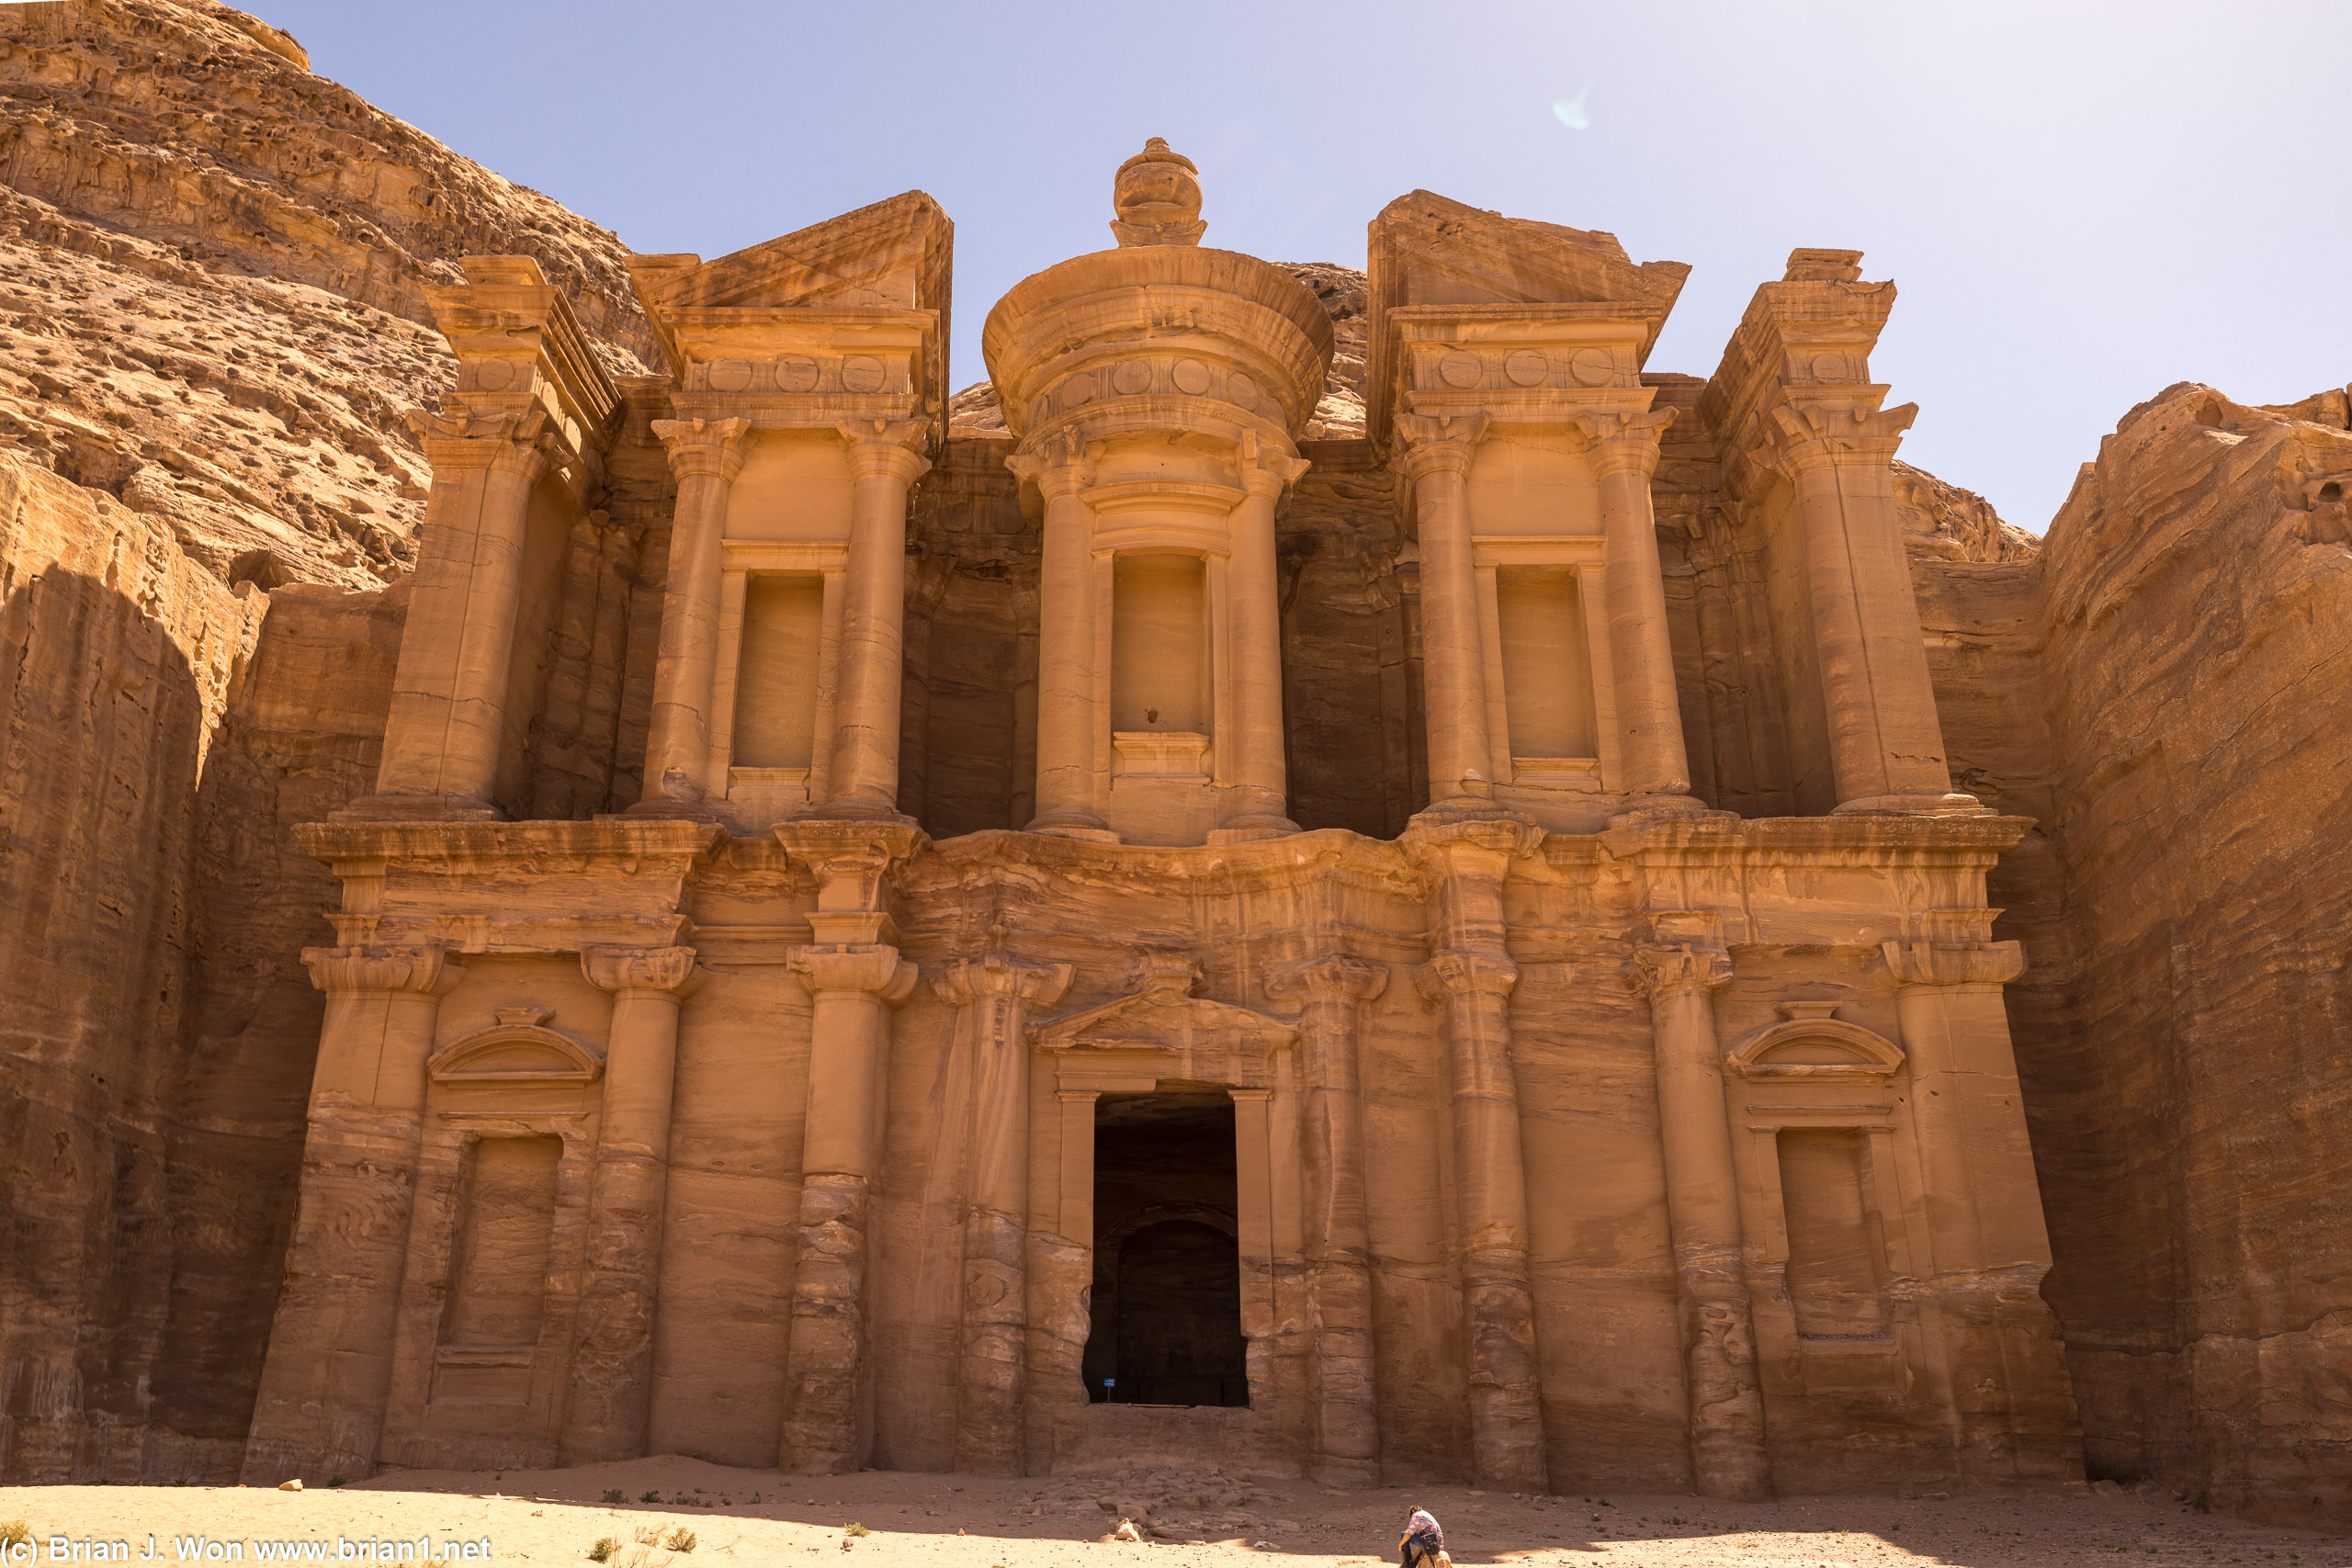 Ad-Deir (the Monastery). Well worth the 30 minute hike up.